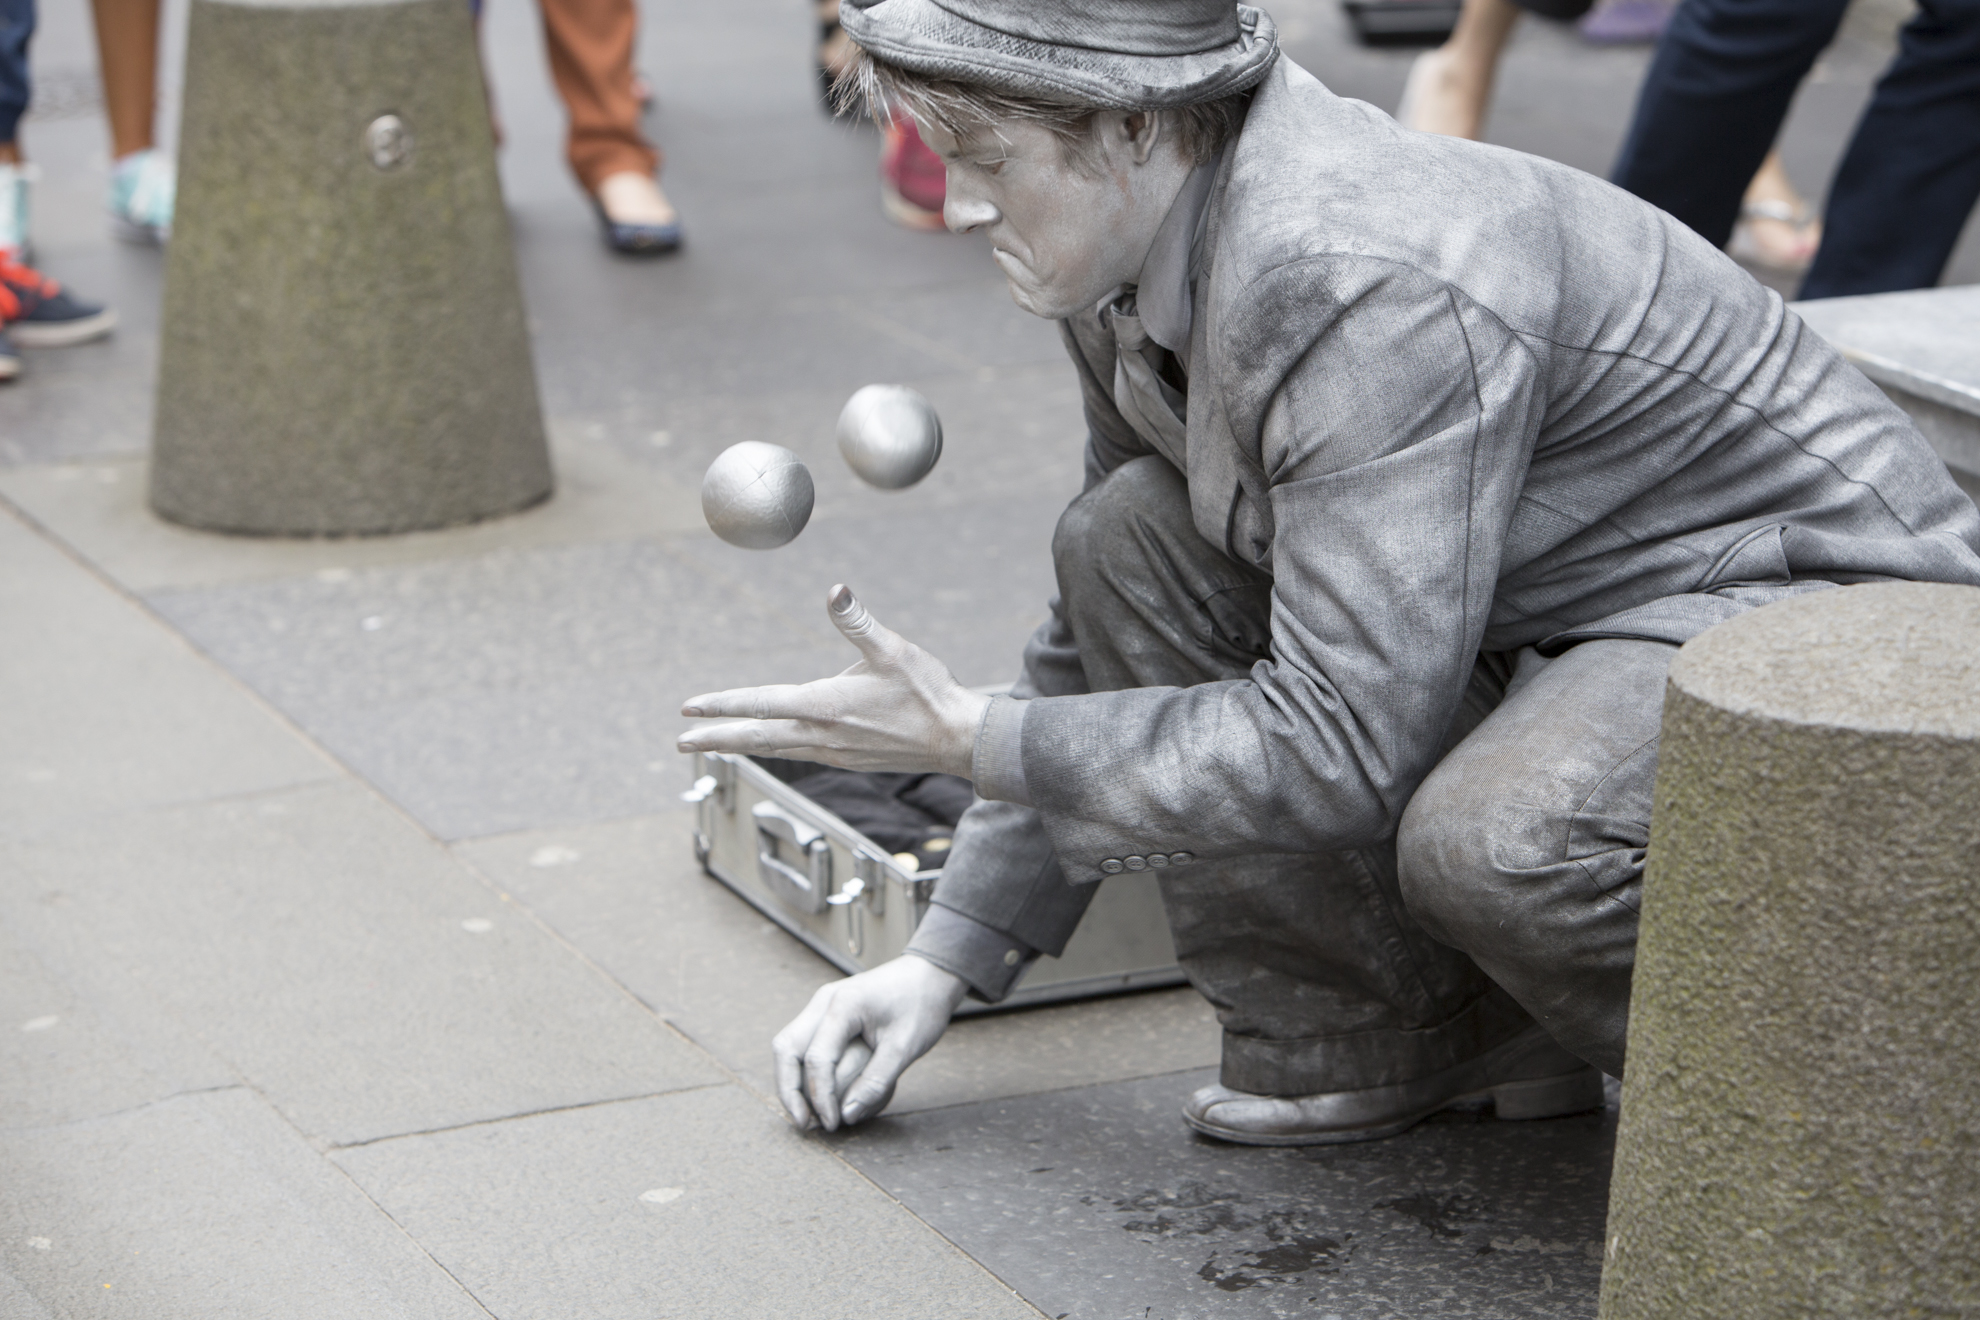  John Godbolt, from Bristol, England, performs as a juggling statue in front of St. Giles Cathedral on the Royal Mile during the 2014 Edinburgh Festival of the Fringe in Edinburgh, Scotland.    